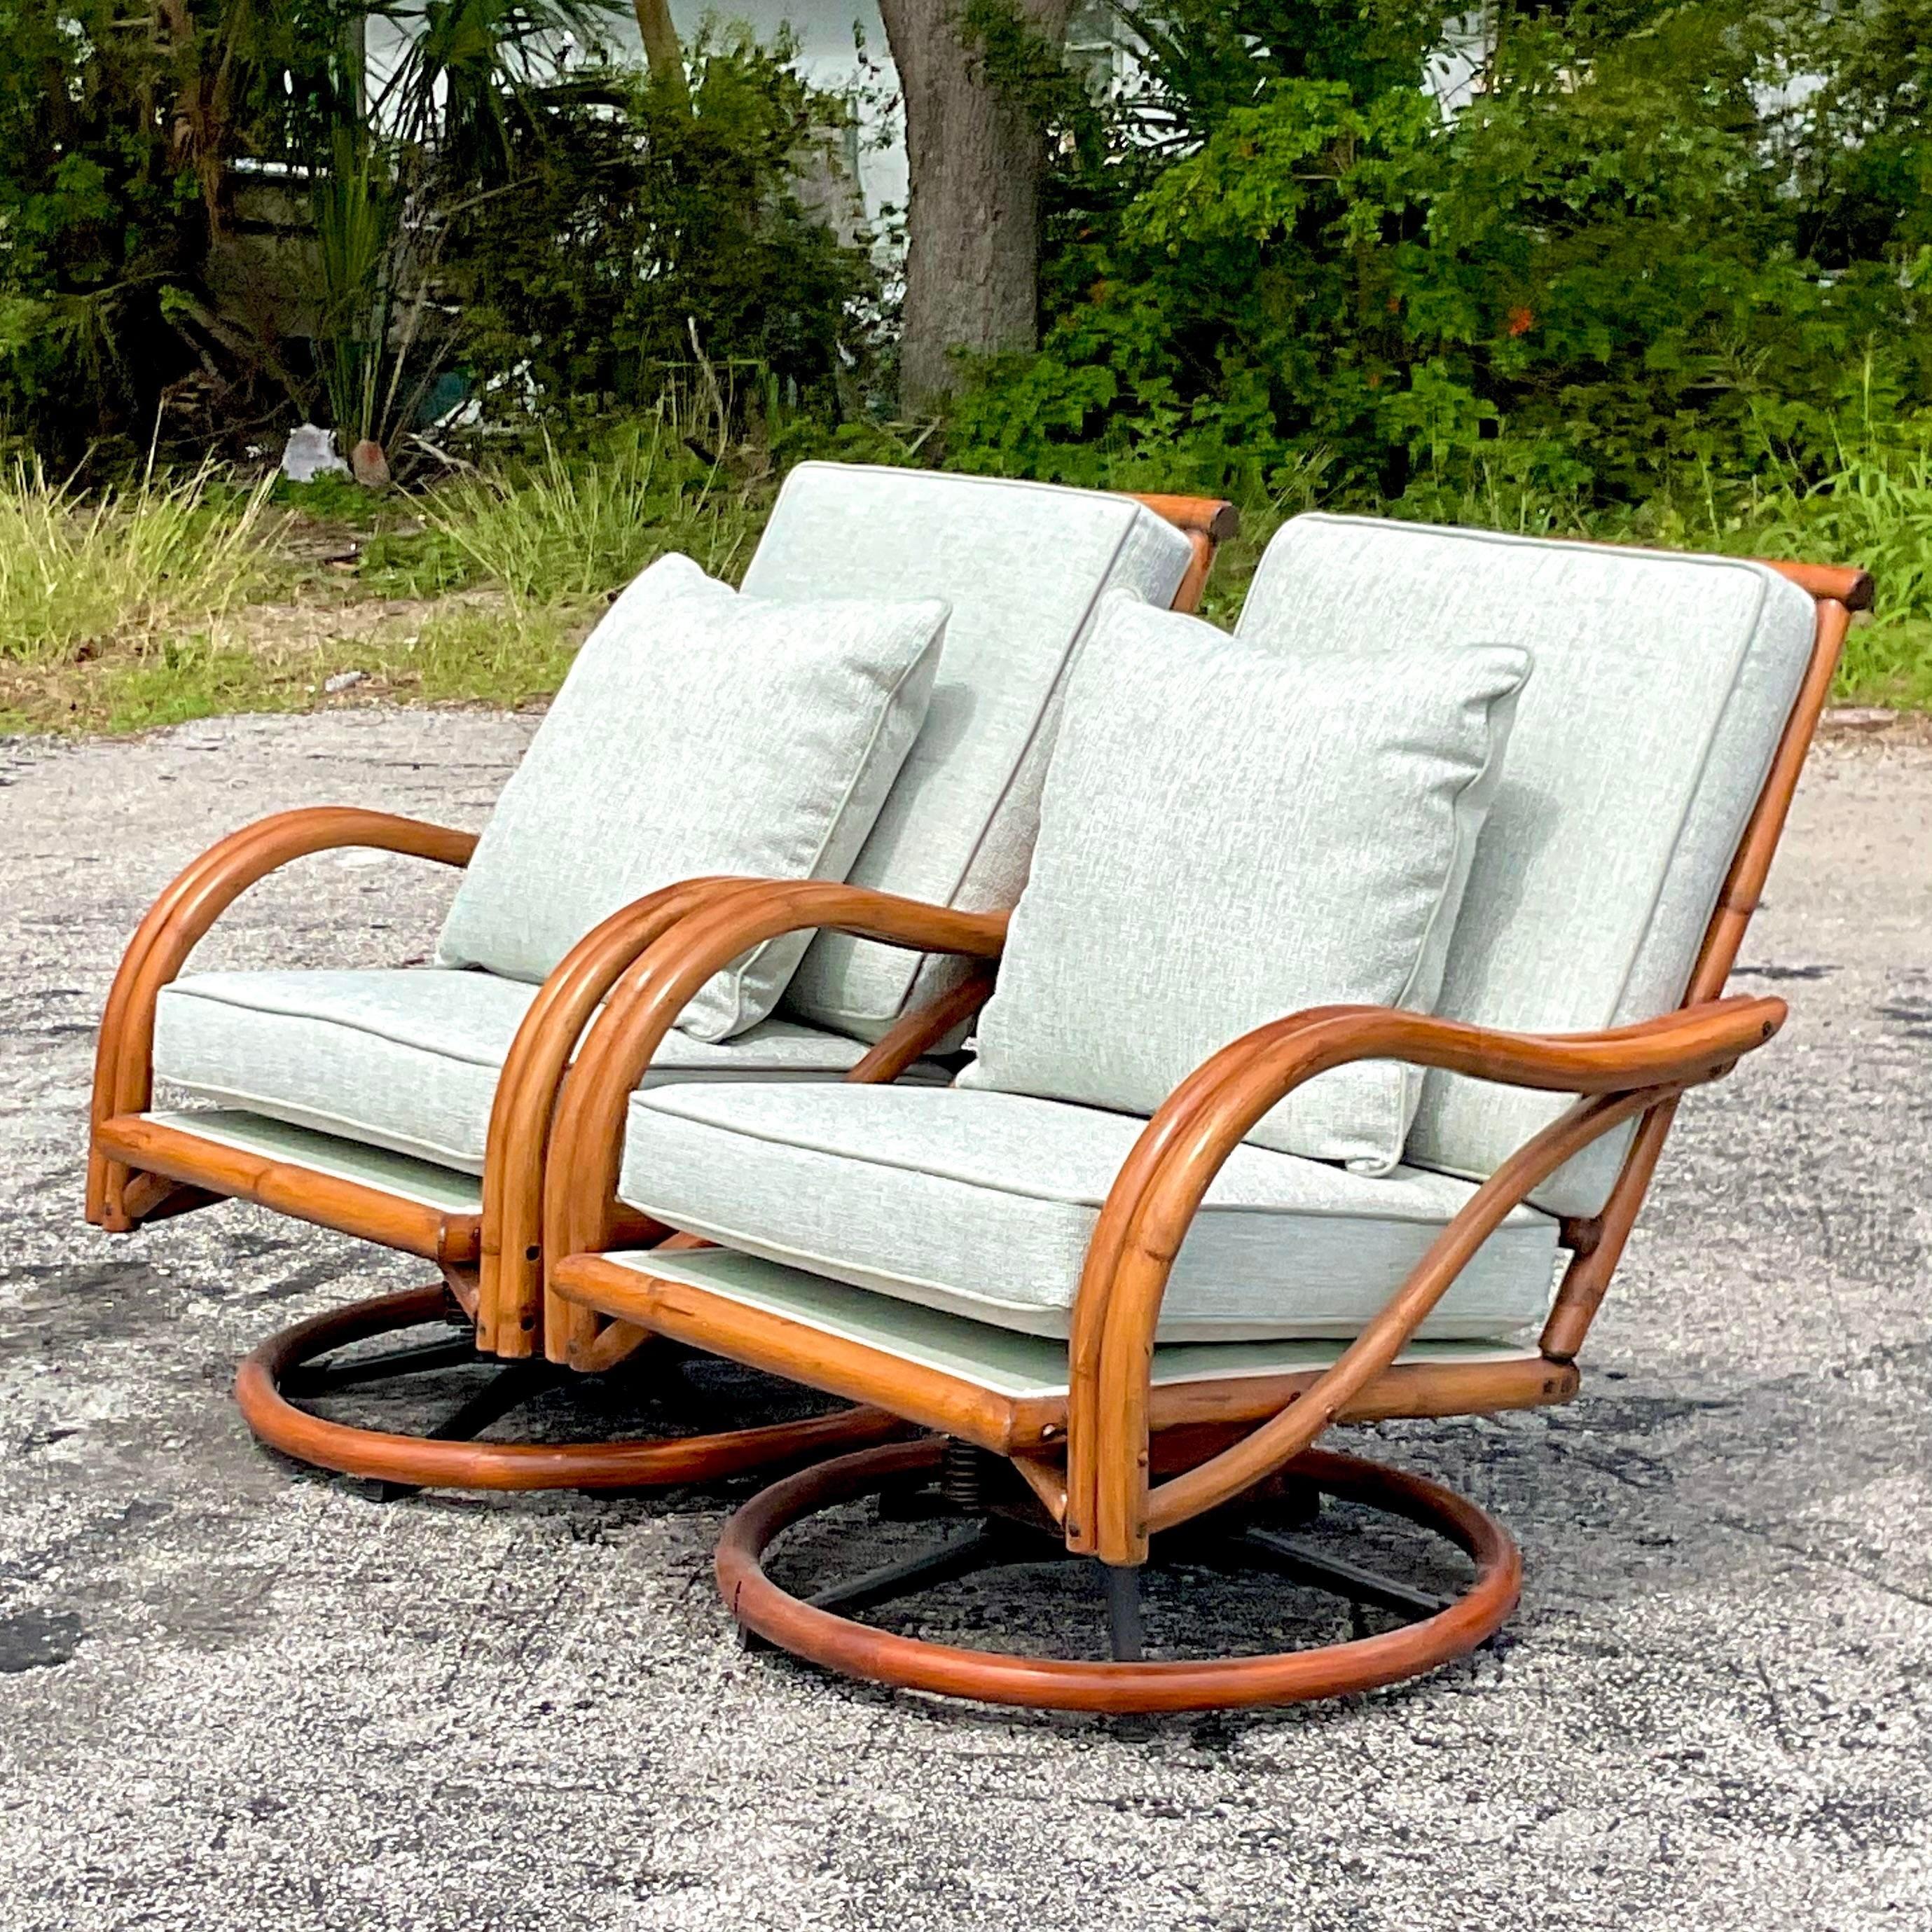 A stunning pair of vintage Coastal swivel chairs. Chic bent rattan with loop sides and a high back. Fully restored with a full rattan restoration and all new upholstery. A chic celadon Sunbrella fabric with the Krypton treatment for extra